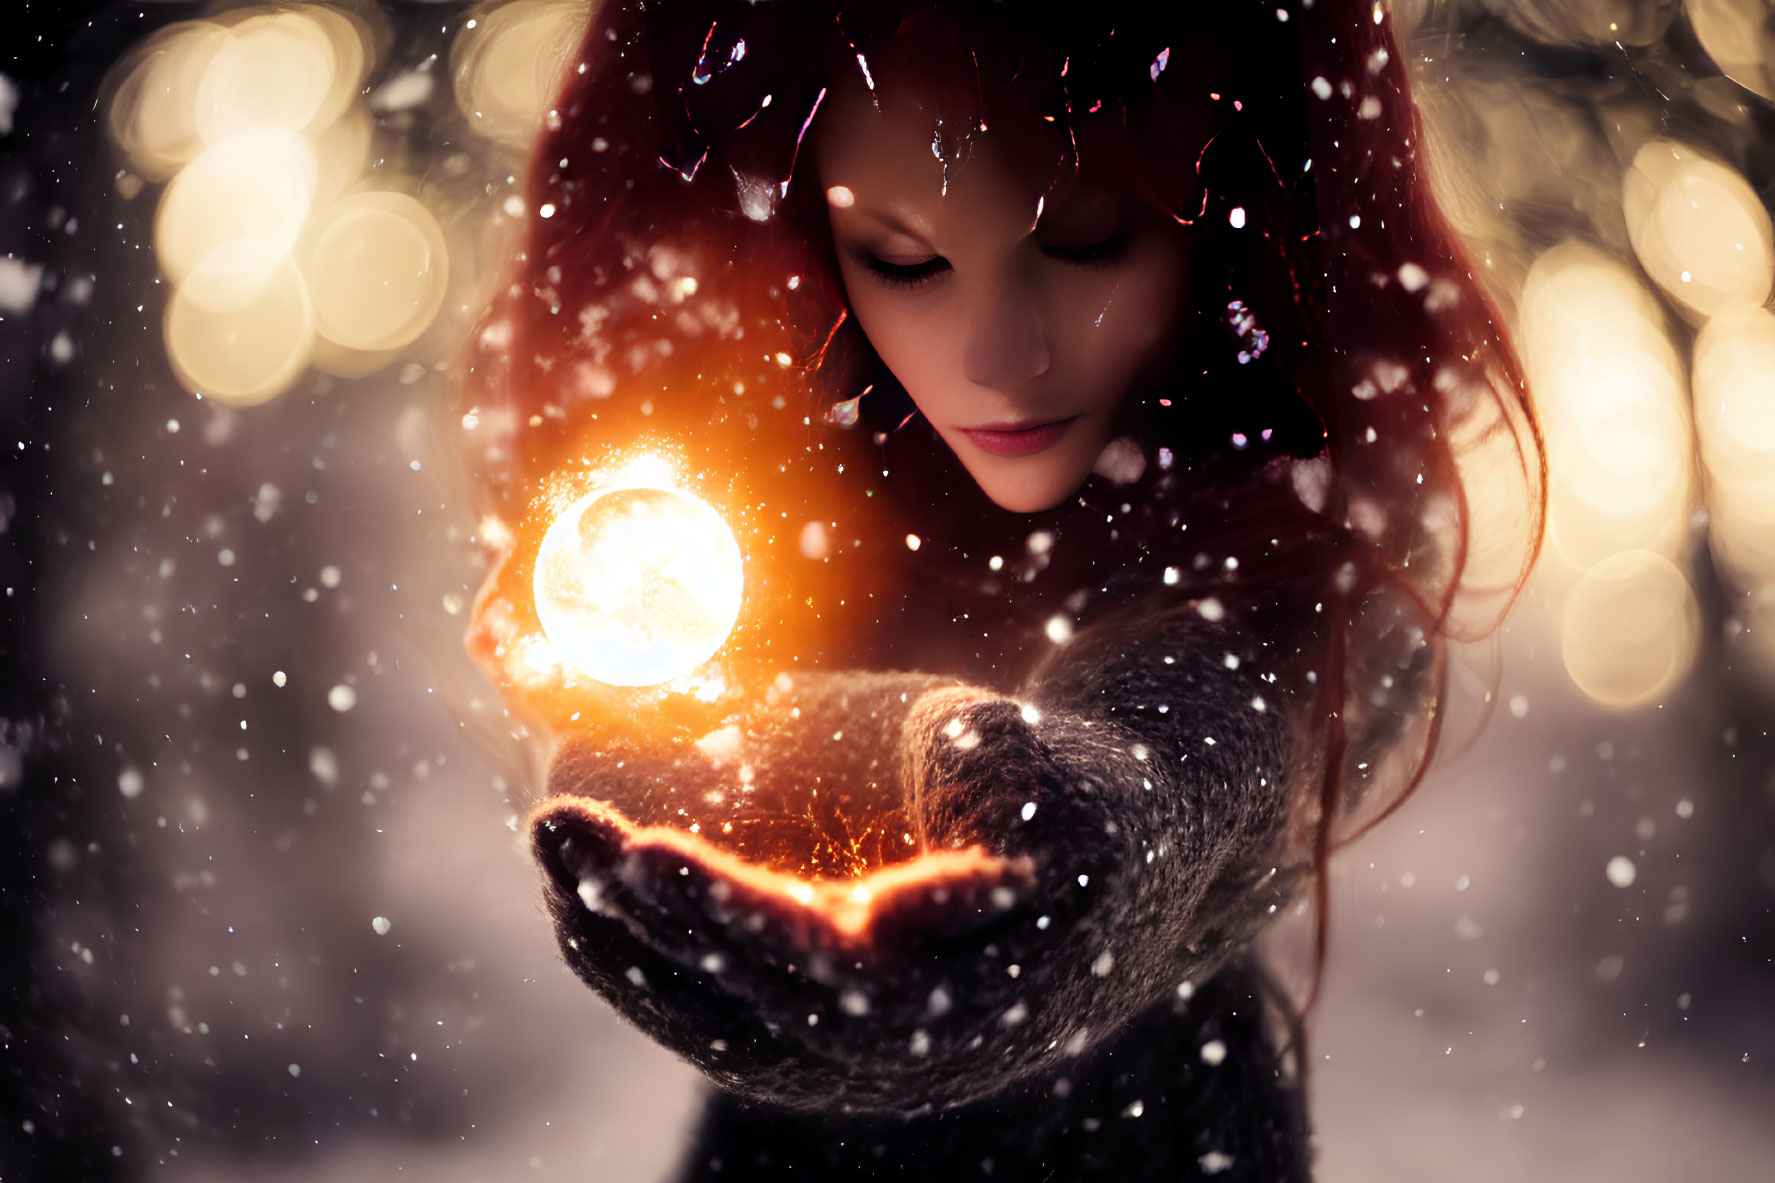 Enchanted person holding glowing light in snowy scene